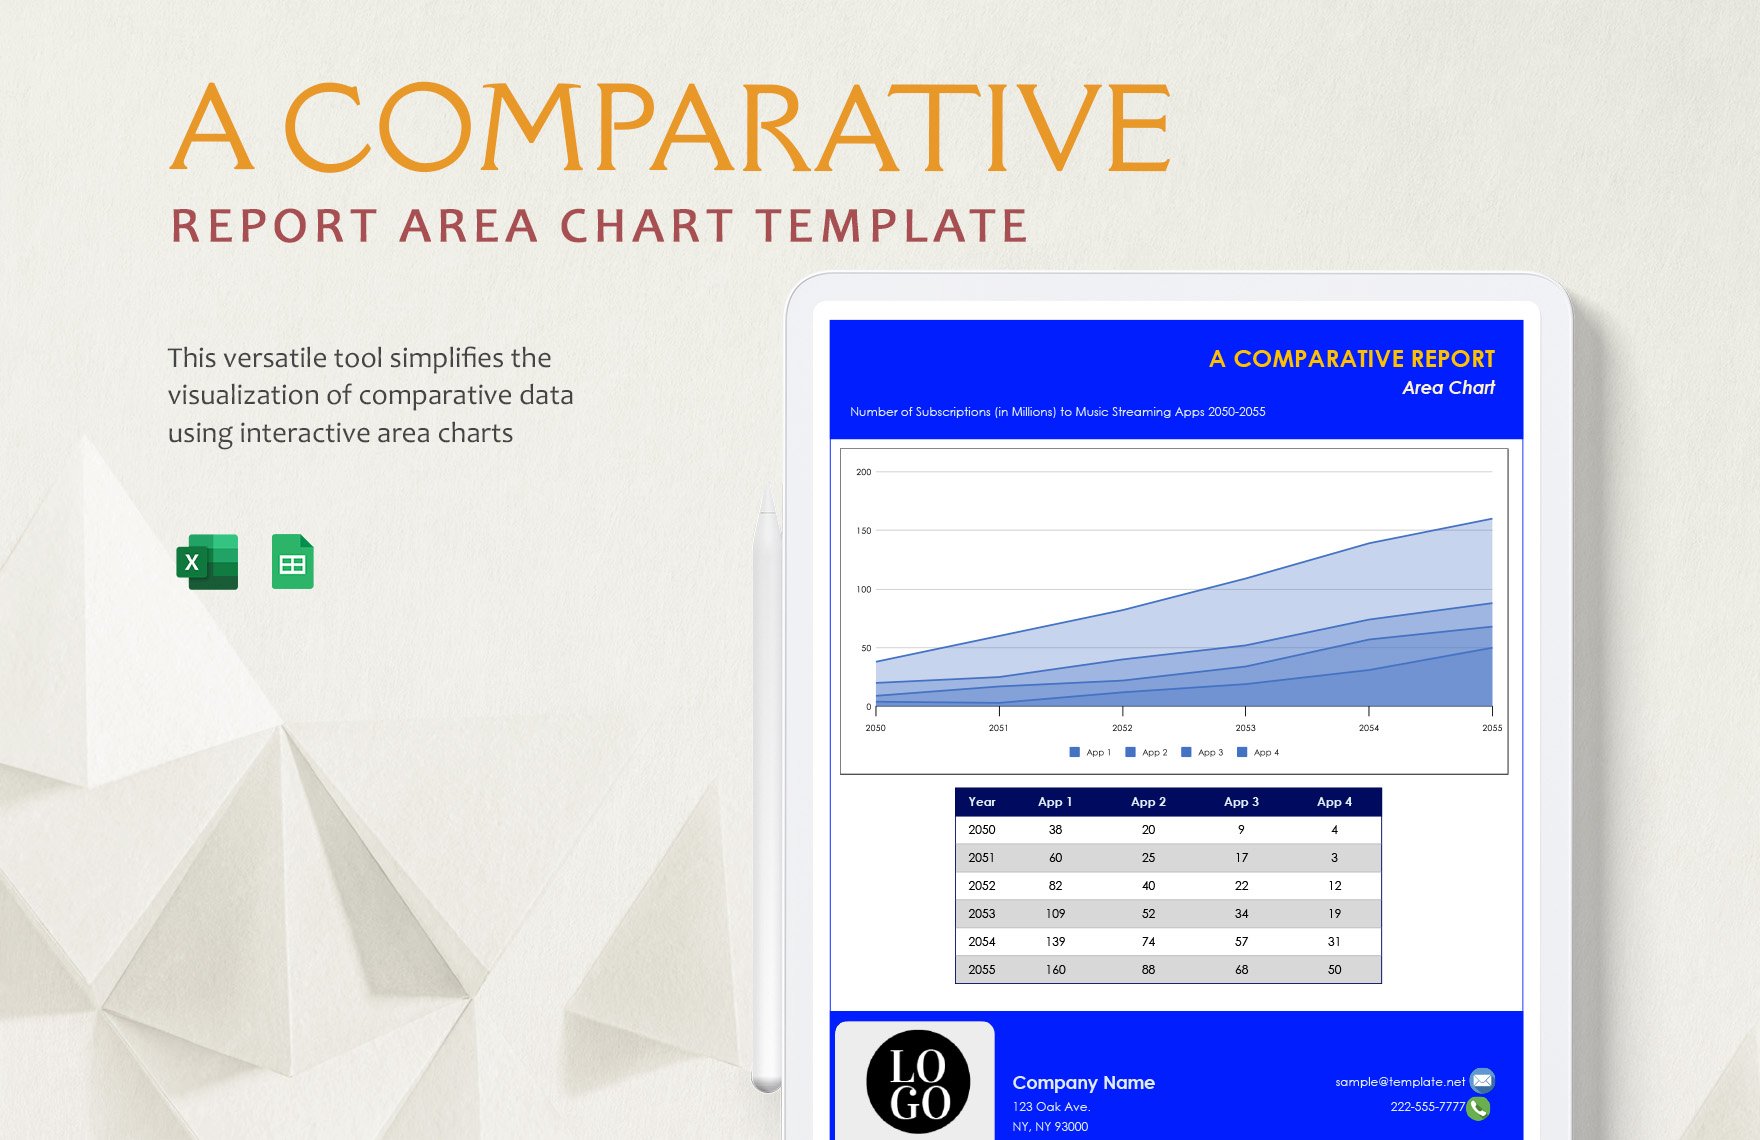 A Comparative Report Area Chart Template